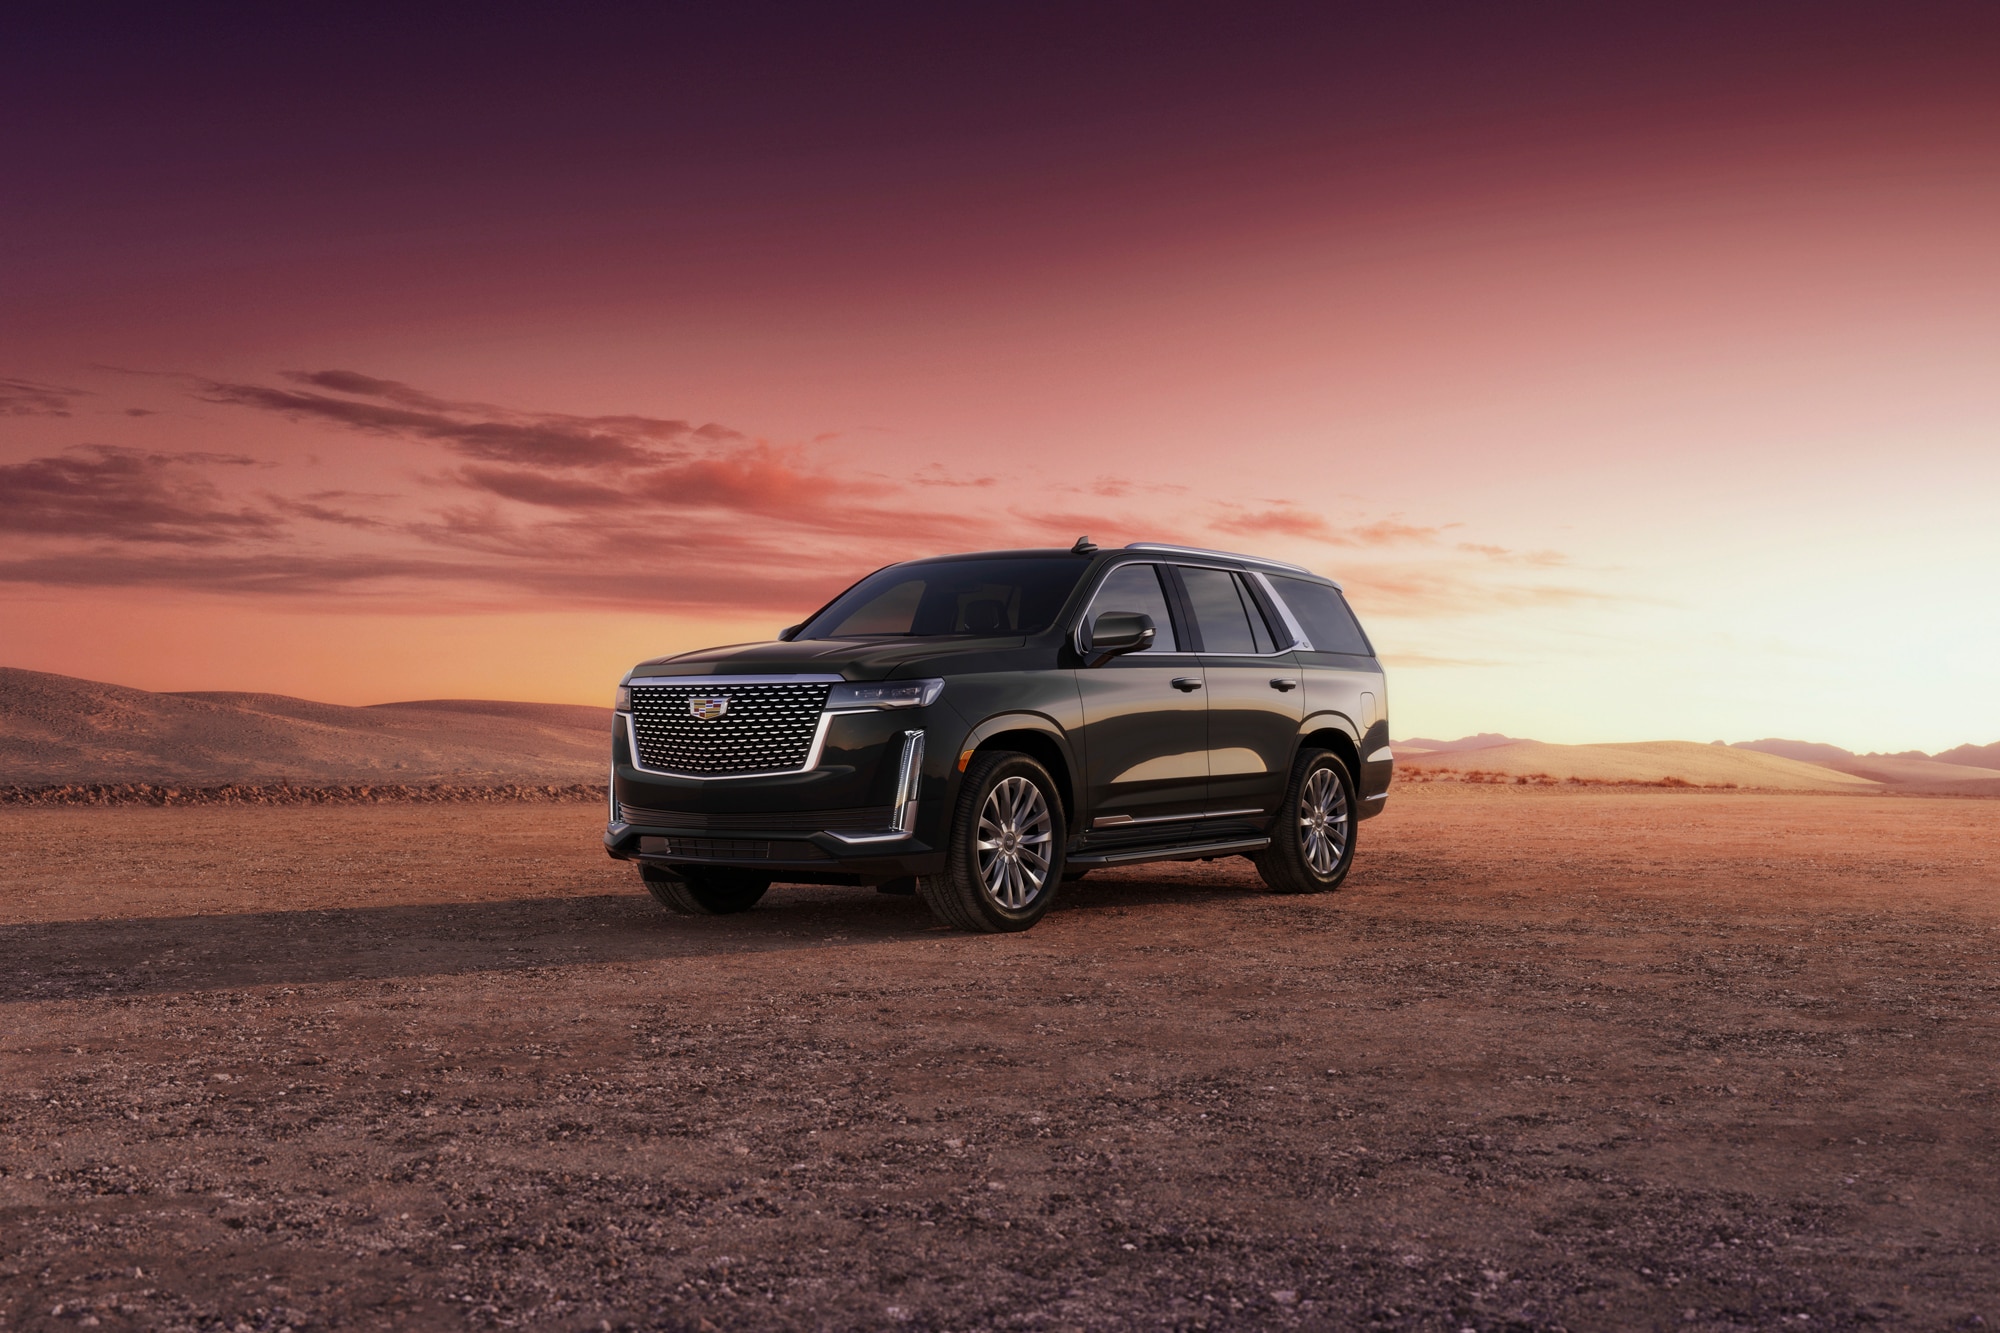 2023 Cadillac Escalade parked in desert at sunset